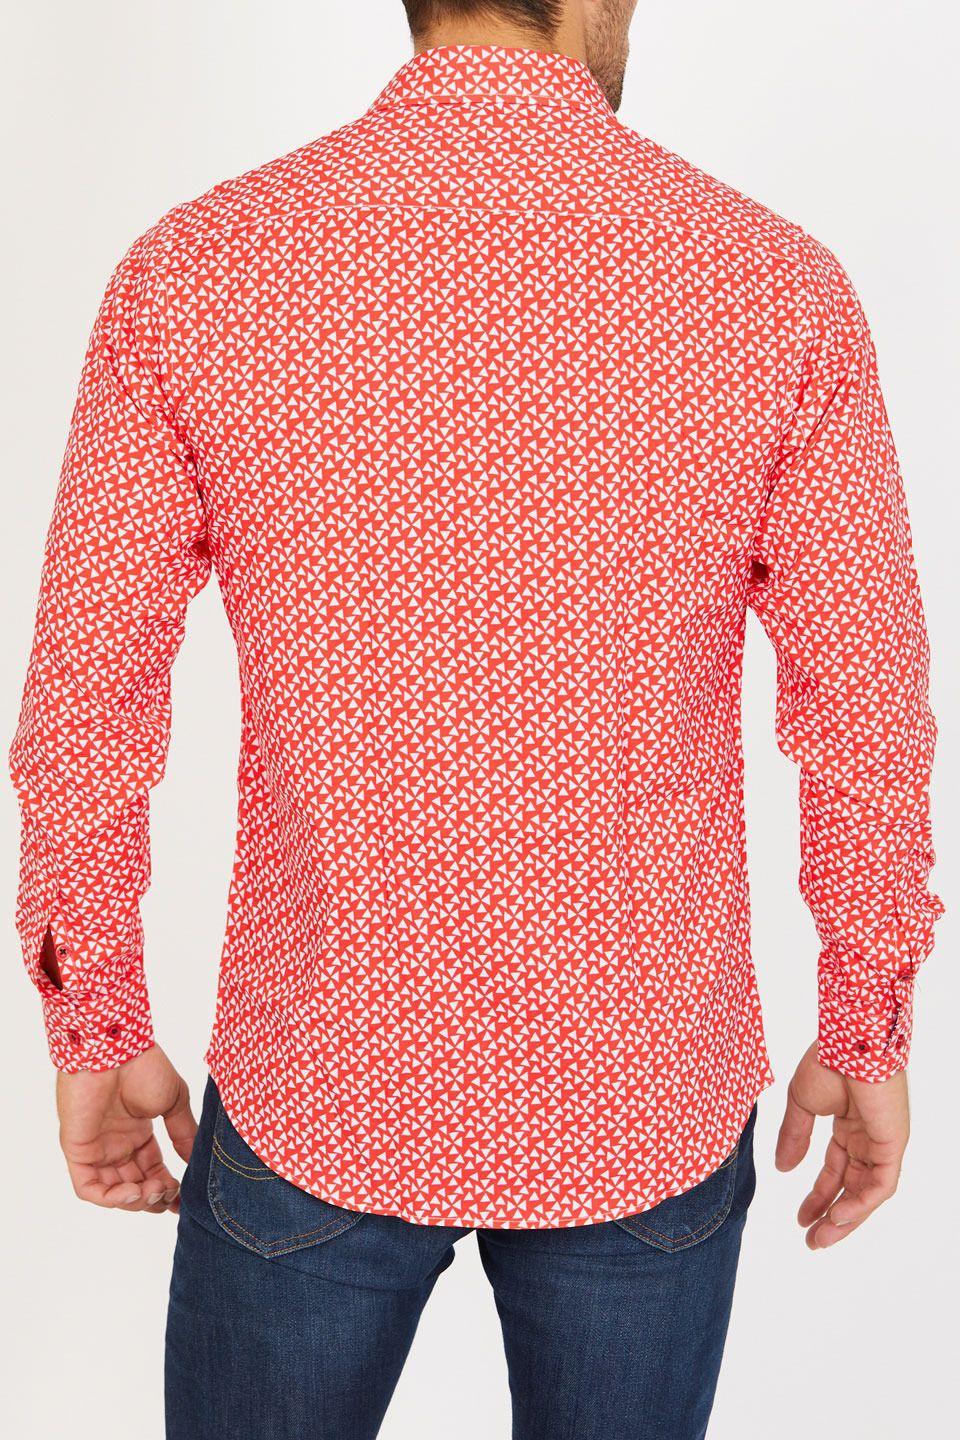 Red White and Triangle Sports Logo - blanc Anderson Organic Sports Shirt in Red White Triangle